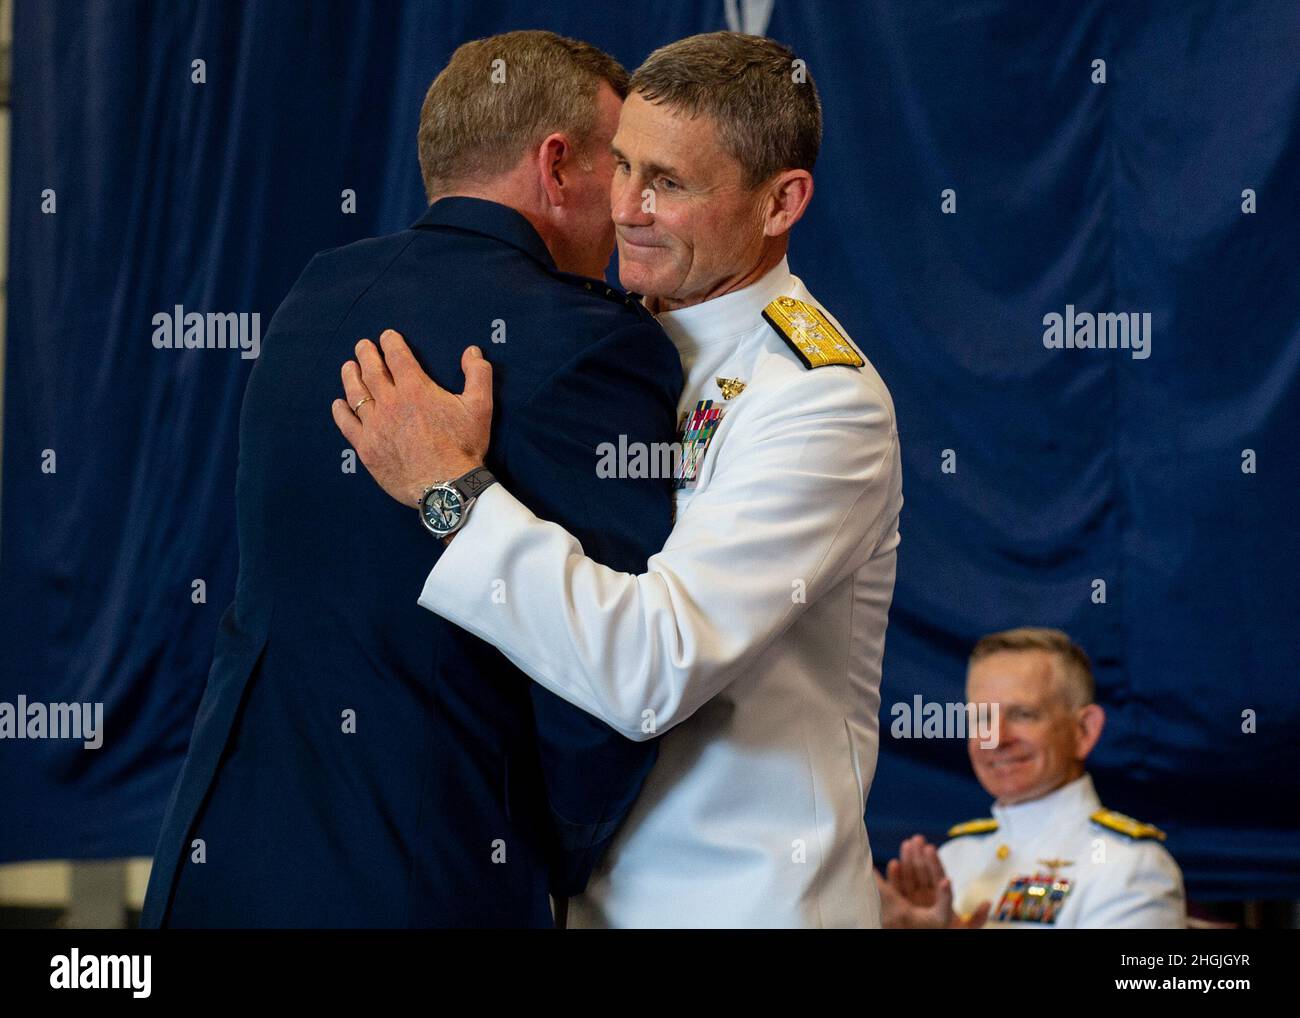 NORFOLK, Va. (Aug. 20, 2021) – Gen. Tod D. Wolters, Commander, U.S. European Command and NATO's Supreme Allied Commander Europe (SACEUR), embraces Vice Adm. Andrew Lewis during a Change of Command ceremony aboard the aircraft carrier USS Harry S. Truman (CVN 75) Aug. 20. Vice Adm. Andrew Lewis was relieved by Vice Adm. Daniel Dwyer as Commander, Joint Force Command Norfolk, Commander, U.S. 2nd Fleet, and Director, Combined Joint operations from the Sea – Centre of Excellence. Stock Photo